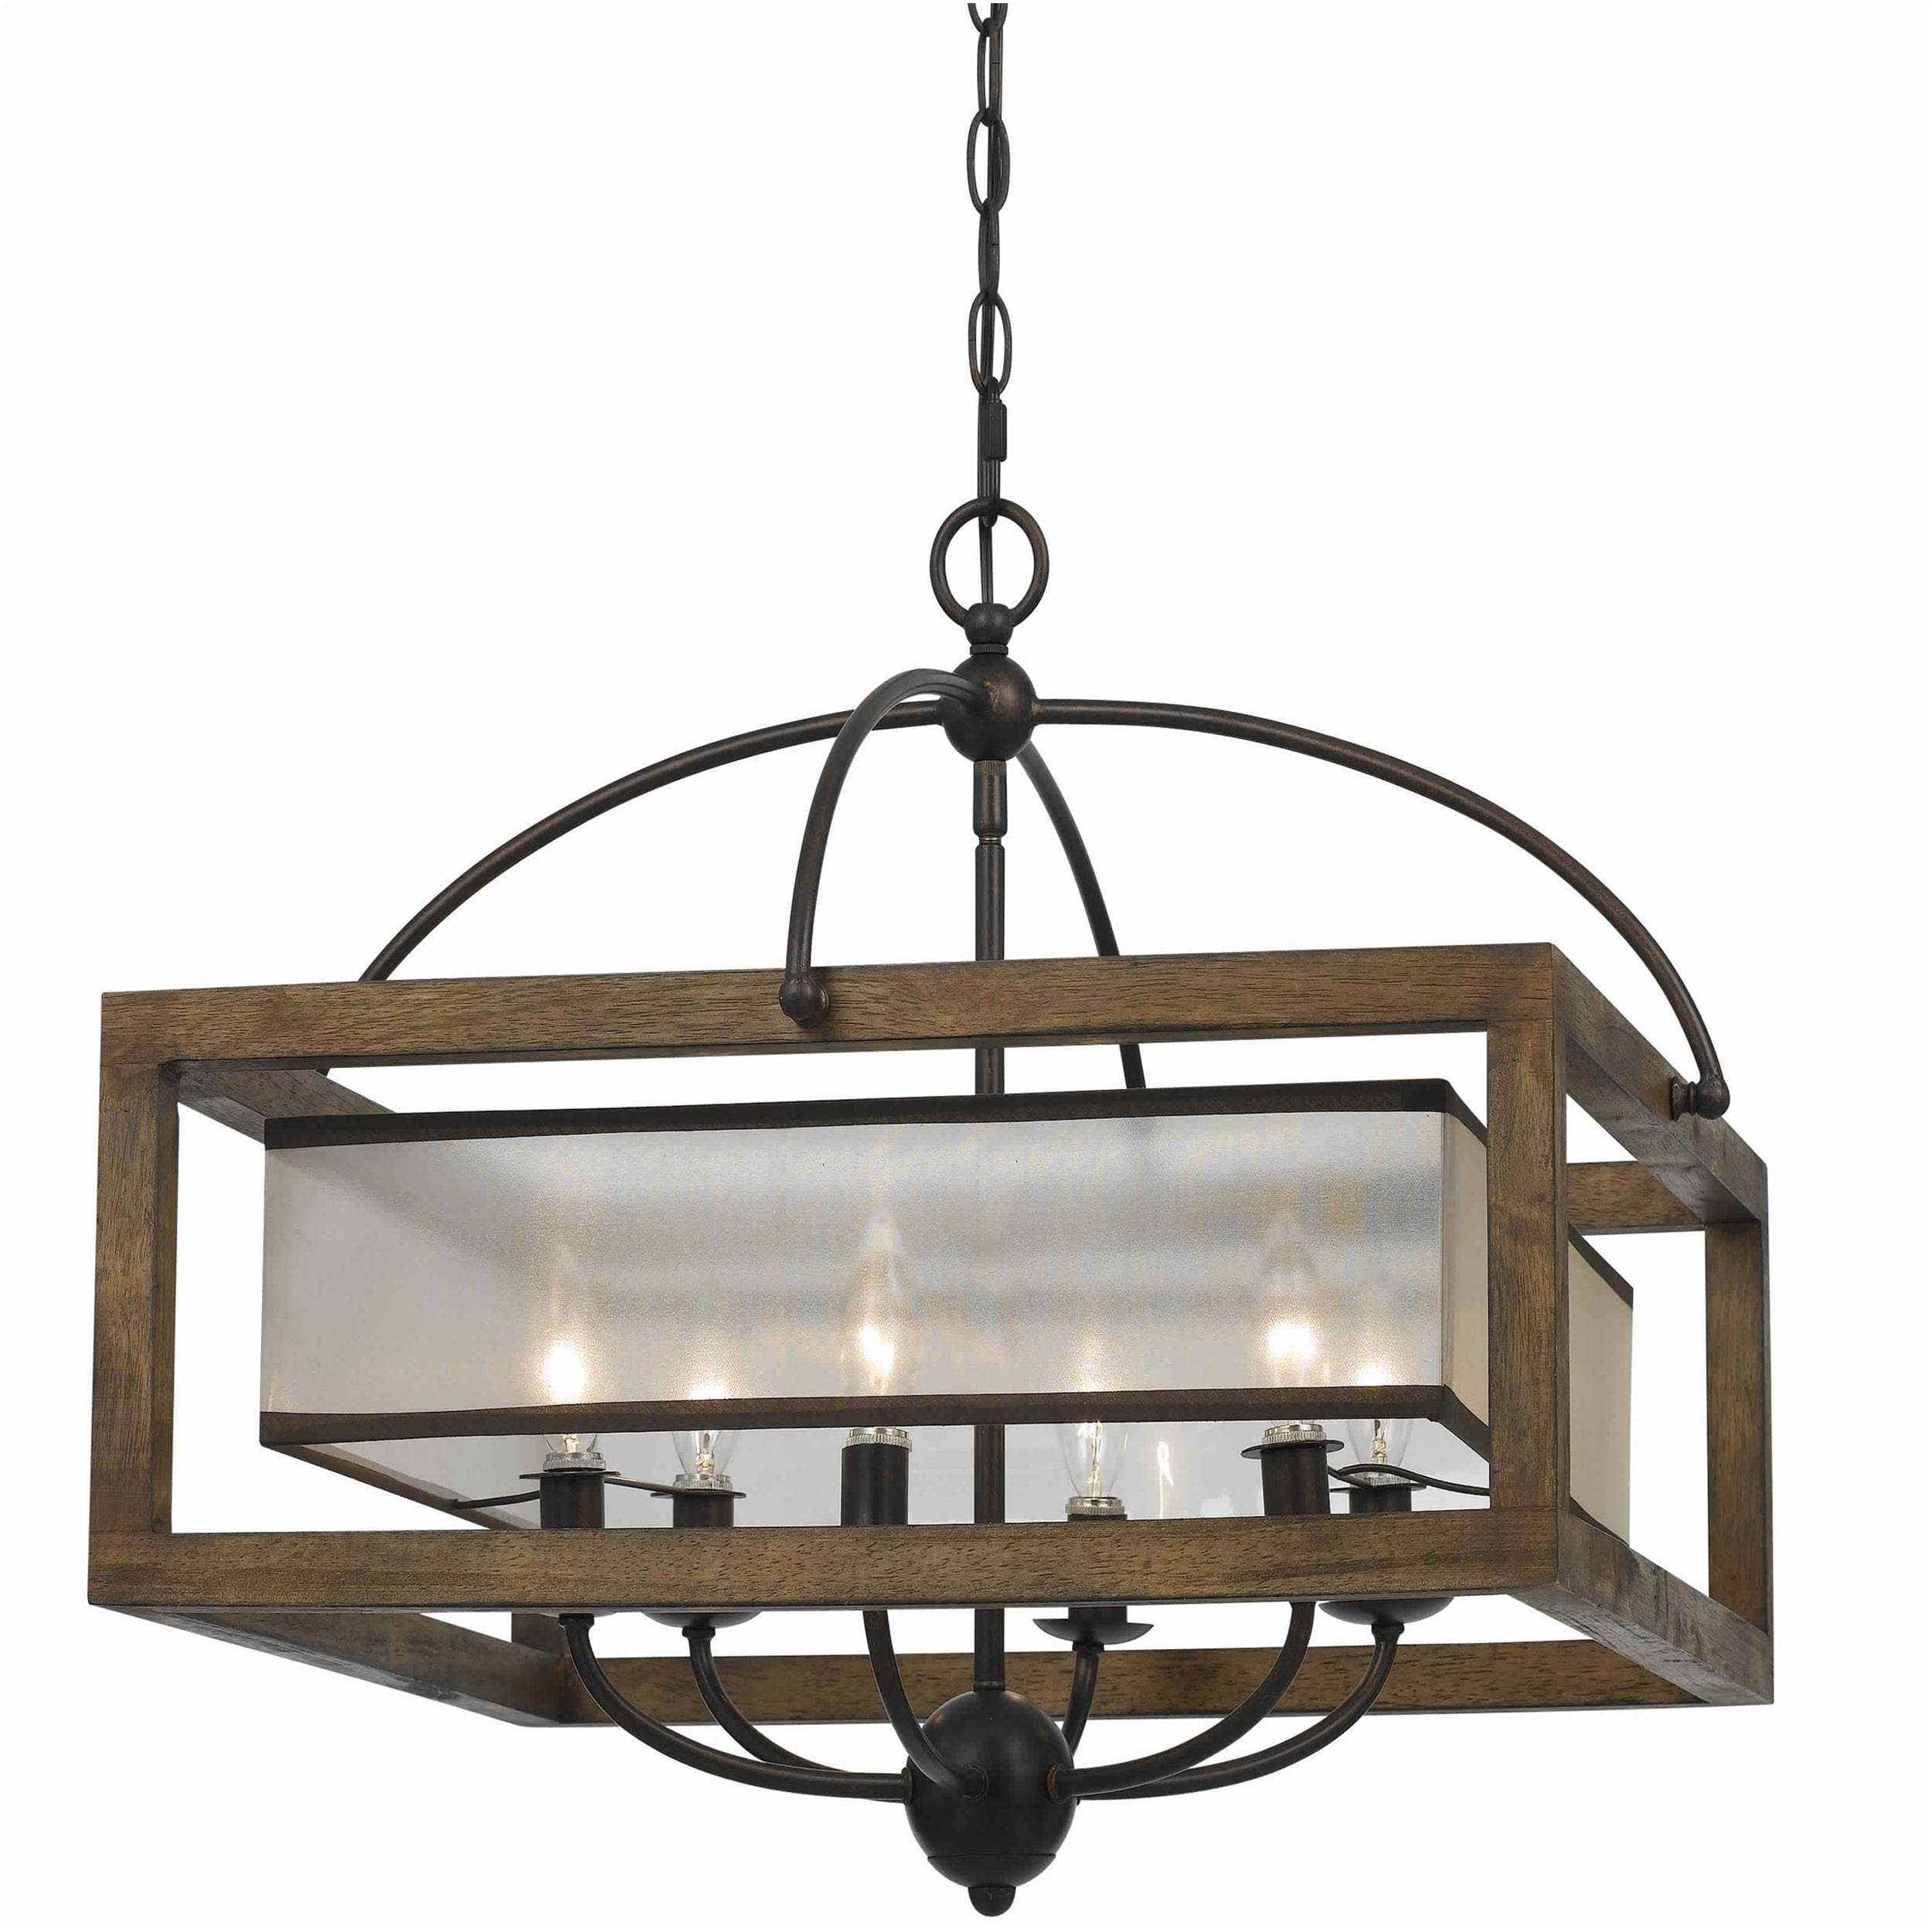 6 Bulb Square Chandelier with Wooden Frame and Organza Striped Shade, Brown - image 1 of 5